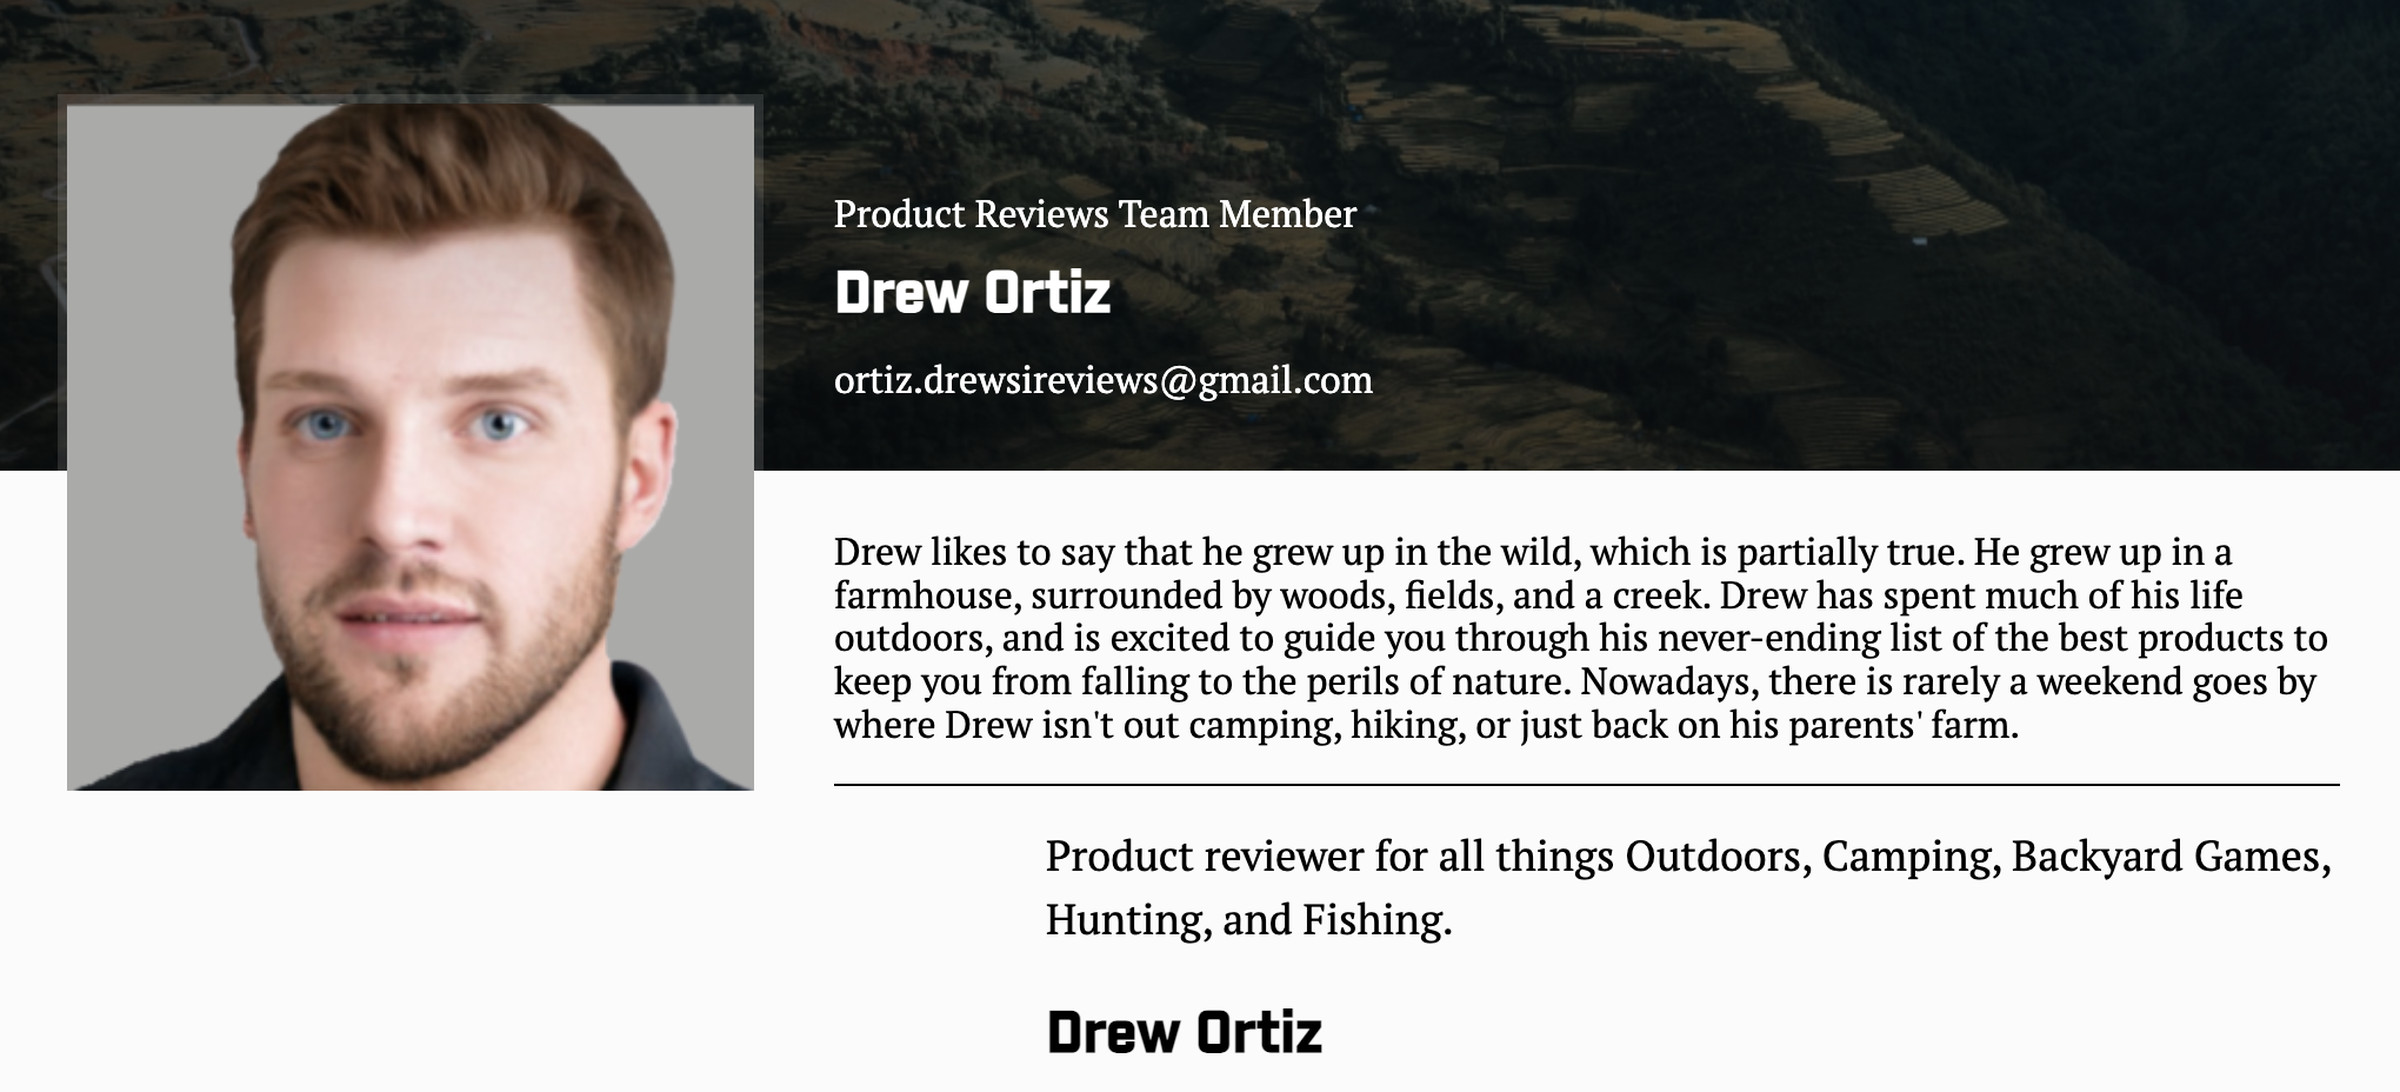 An author page for “Drew Ortiz” with a detailed bio and headshot.